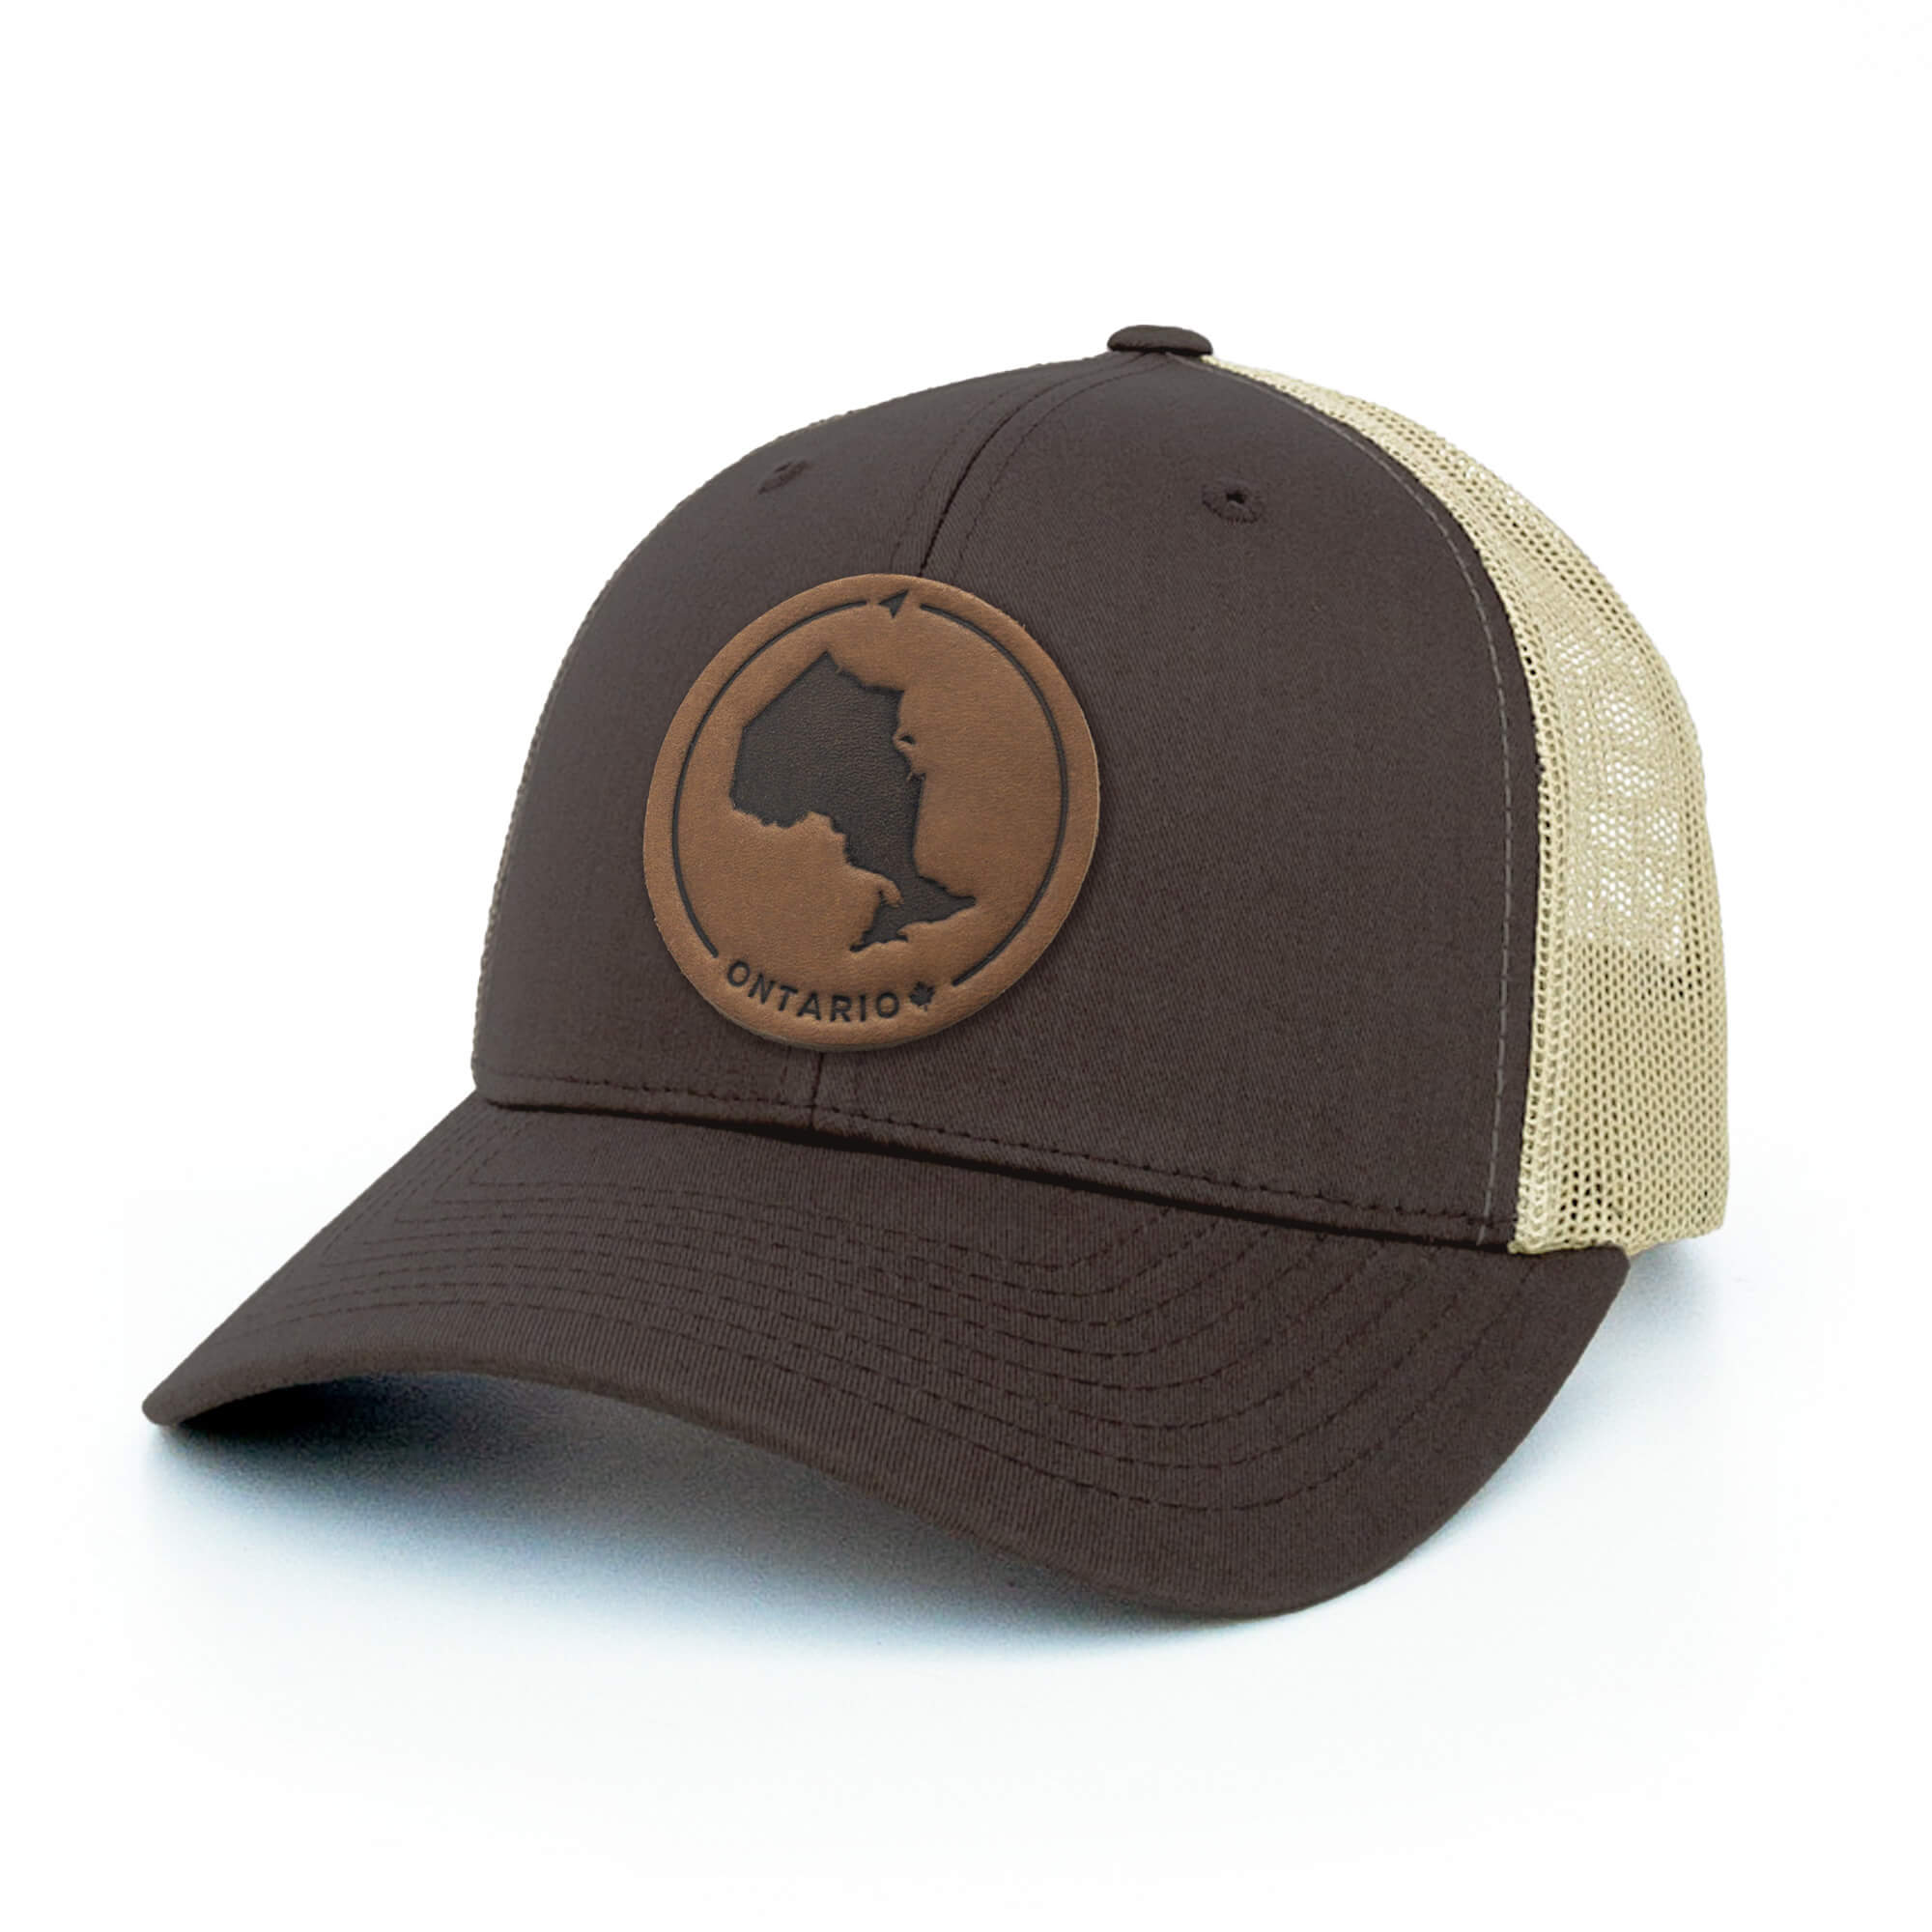 Brown and khaki trucker hat with full-grain leather patch of Ontario | BLACK-002-003, CHARC-002-003, NAVY-002-003, HGREY-002-003, MOSS-002-003, BROWN-002-003